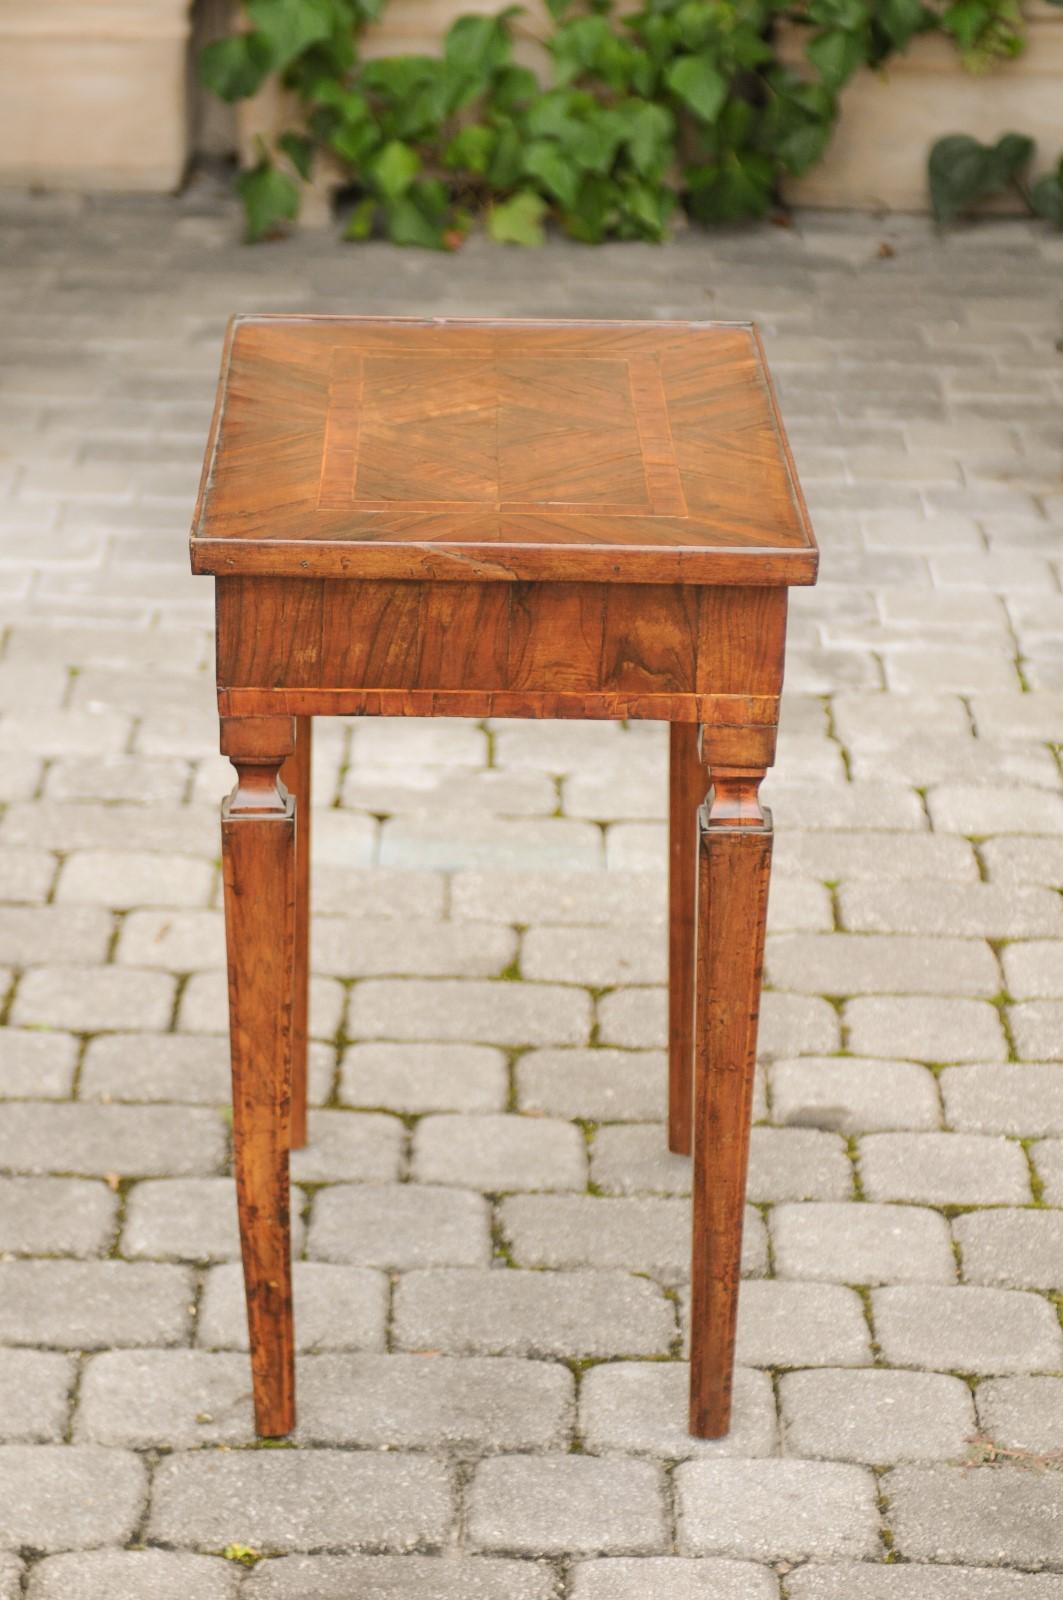 A petite Italian neoclassical walnut veneered side table from the first quarter of the 19th century, with single drawer and tapered legs. This Italian side table features an exquisite rectangular top, exquisitely adorned with walnut veneer